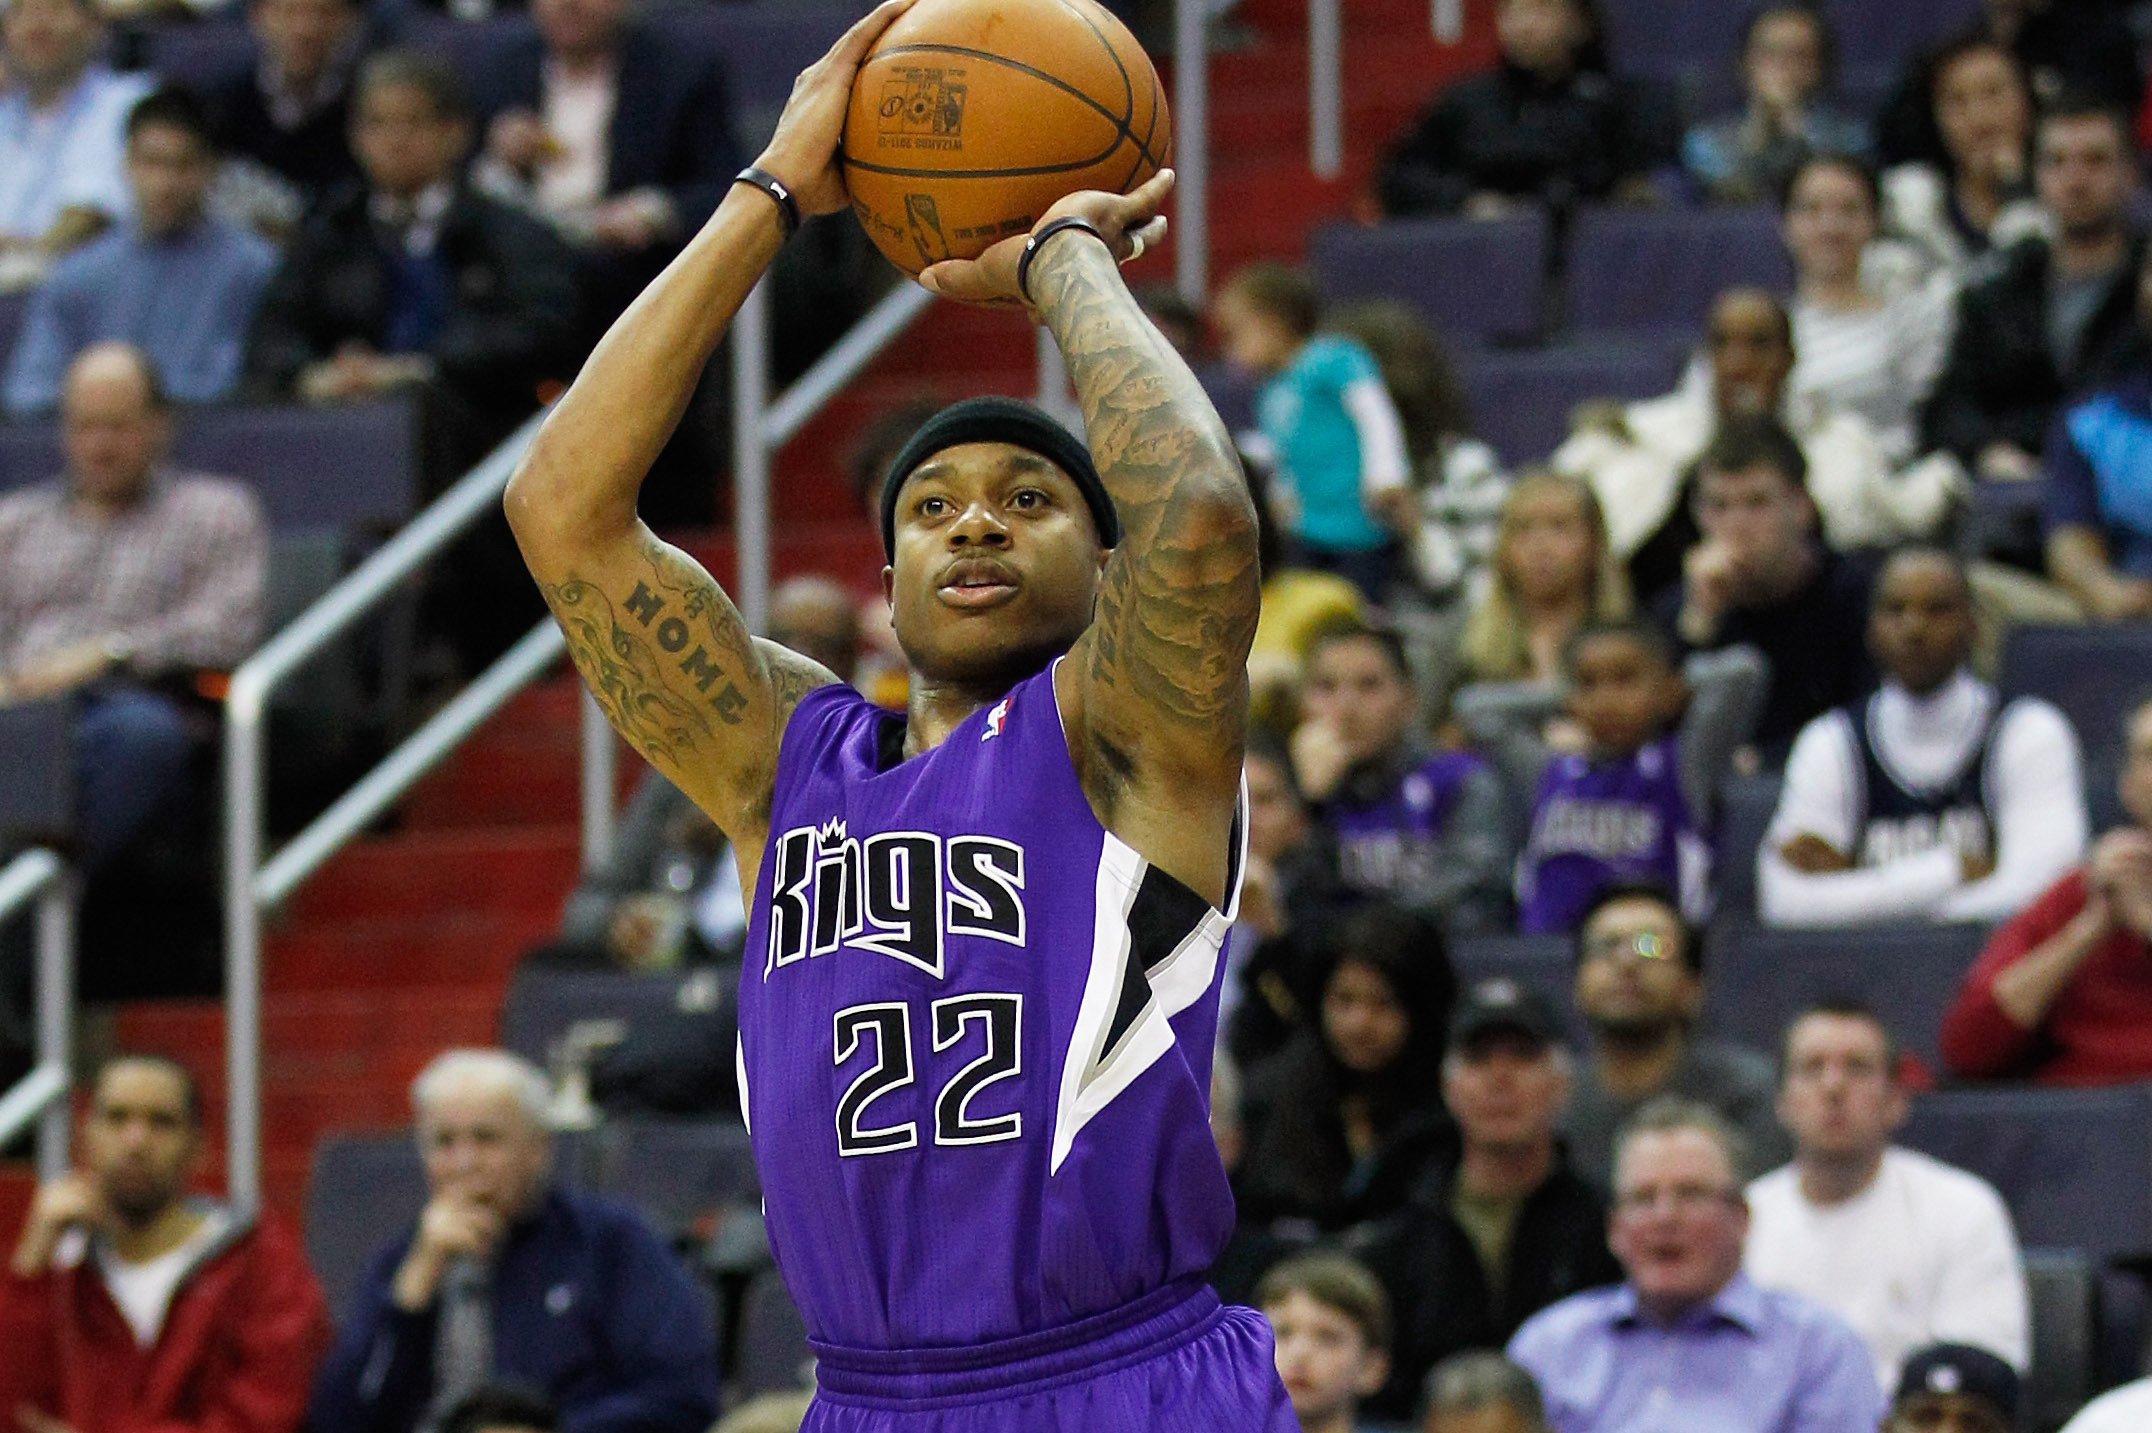 Isaiah Thomas has quite the hot take on the NBA Draft Combine